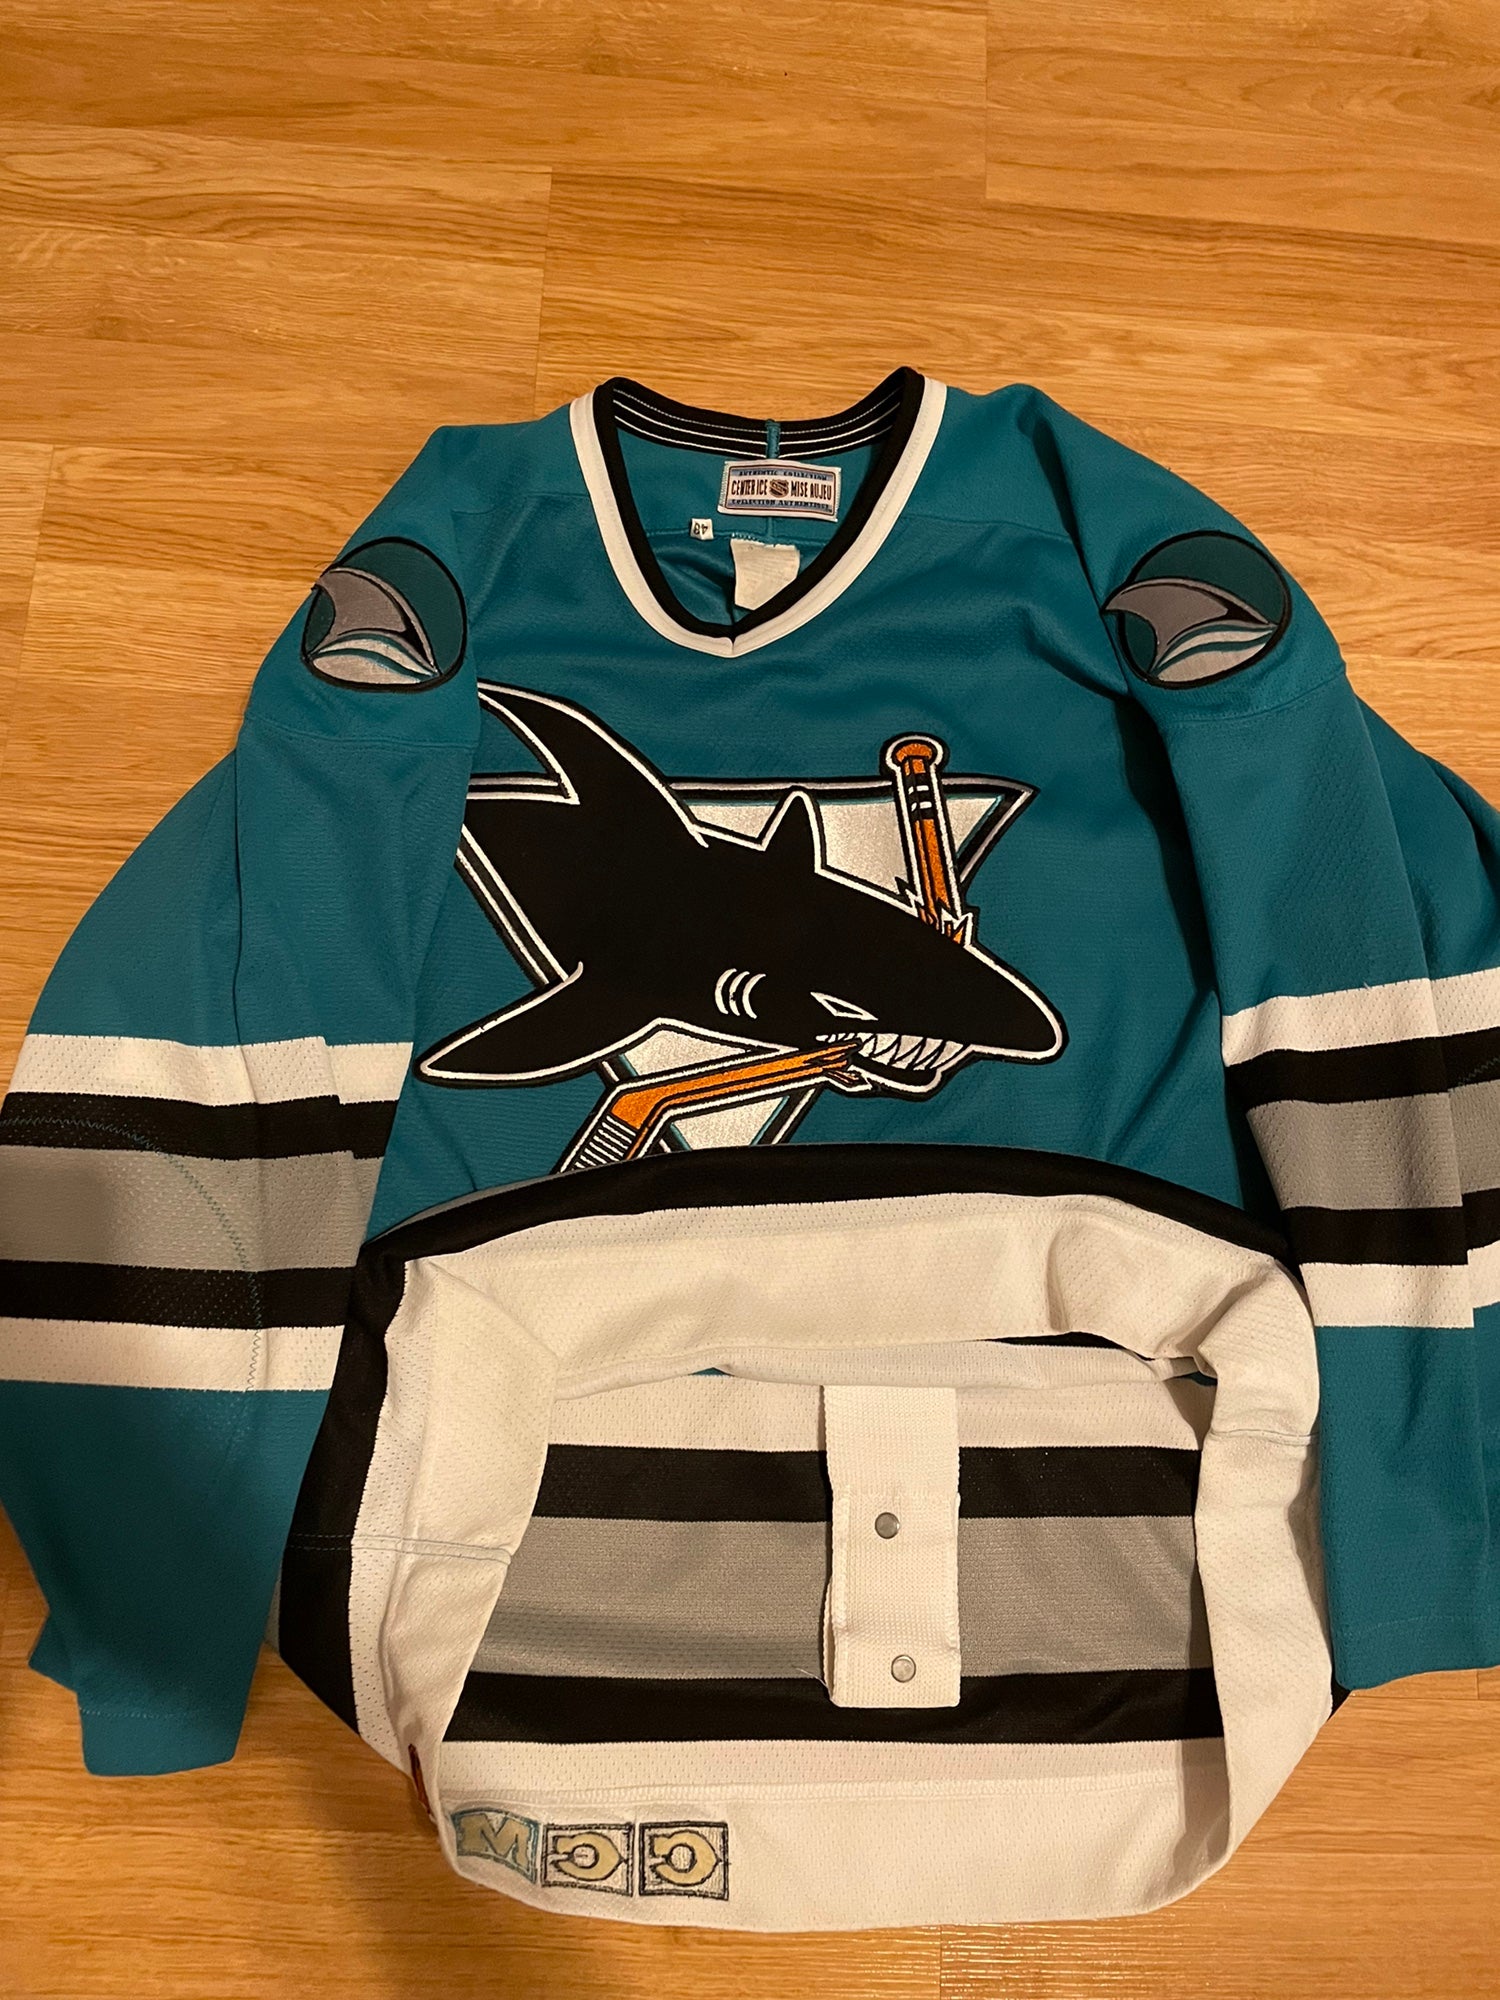 SAN JOSE SHARKS AUTHENTIC REEBOK CENTER ICE JERSEY. AWAY/ROAD MENS SIZE 60.  NWT